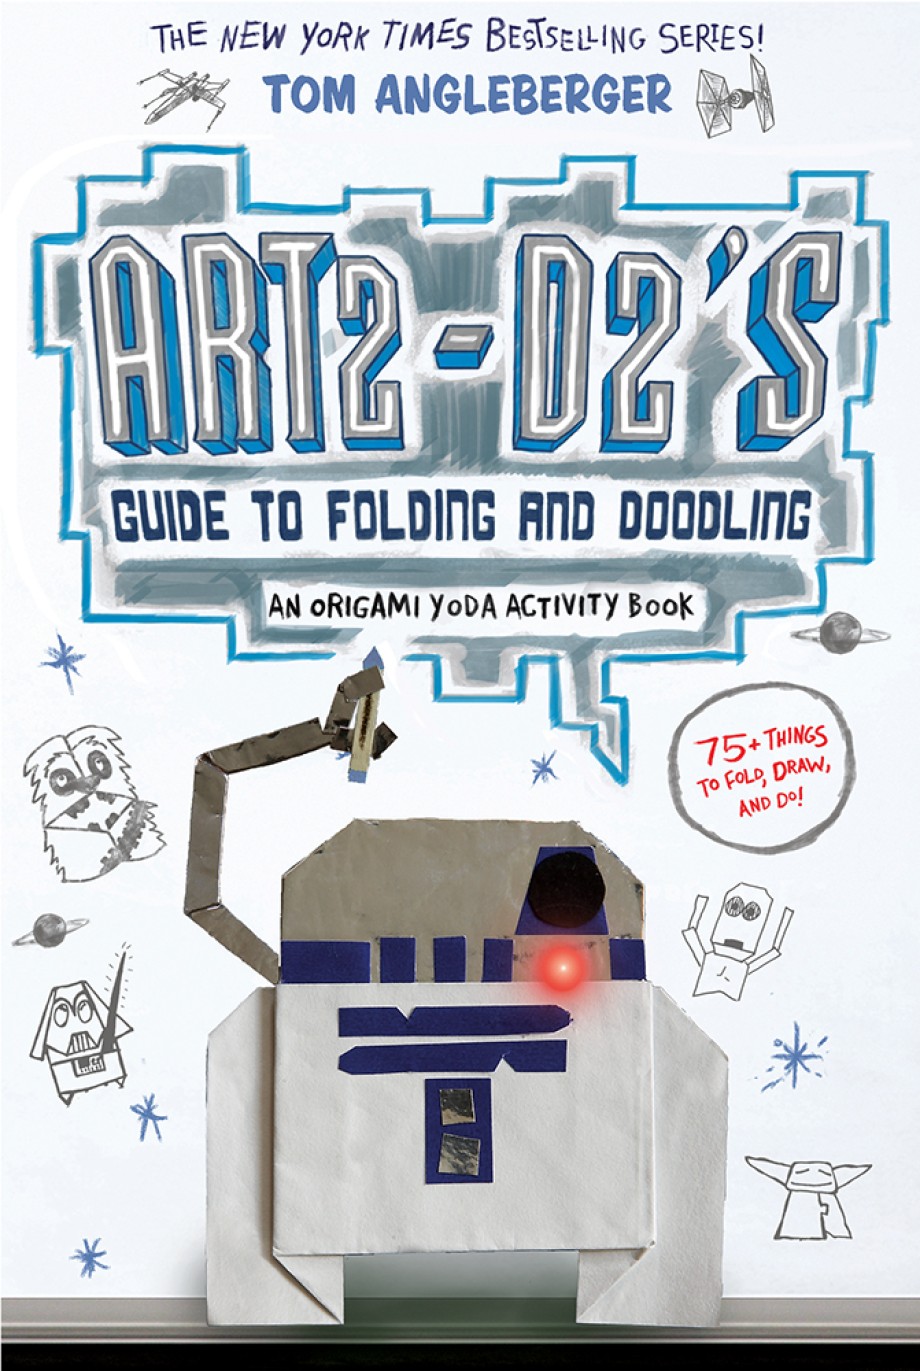 Art2-D2's Guide to Folding and Doodling (An Origami Yoda Activity Book) 